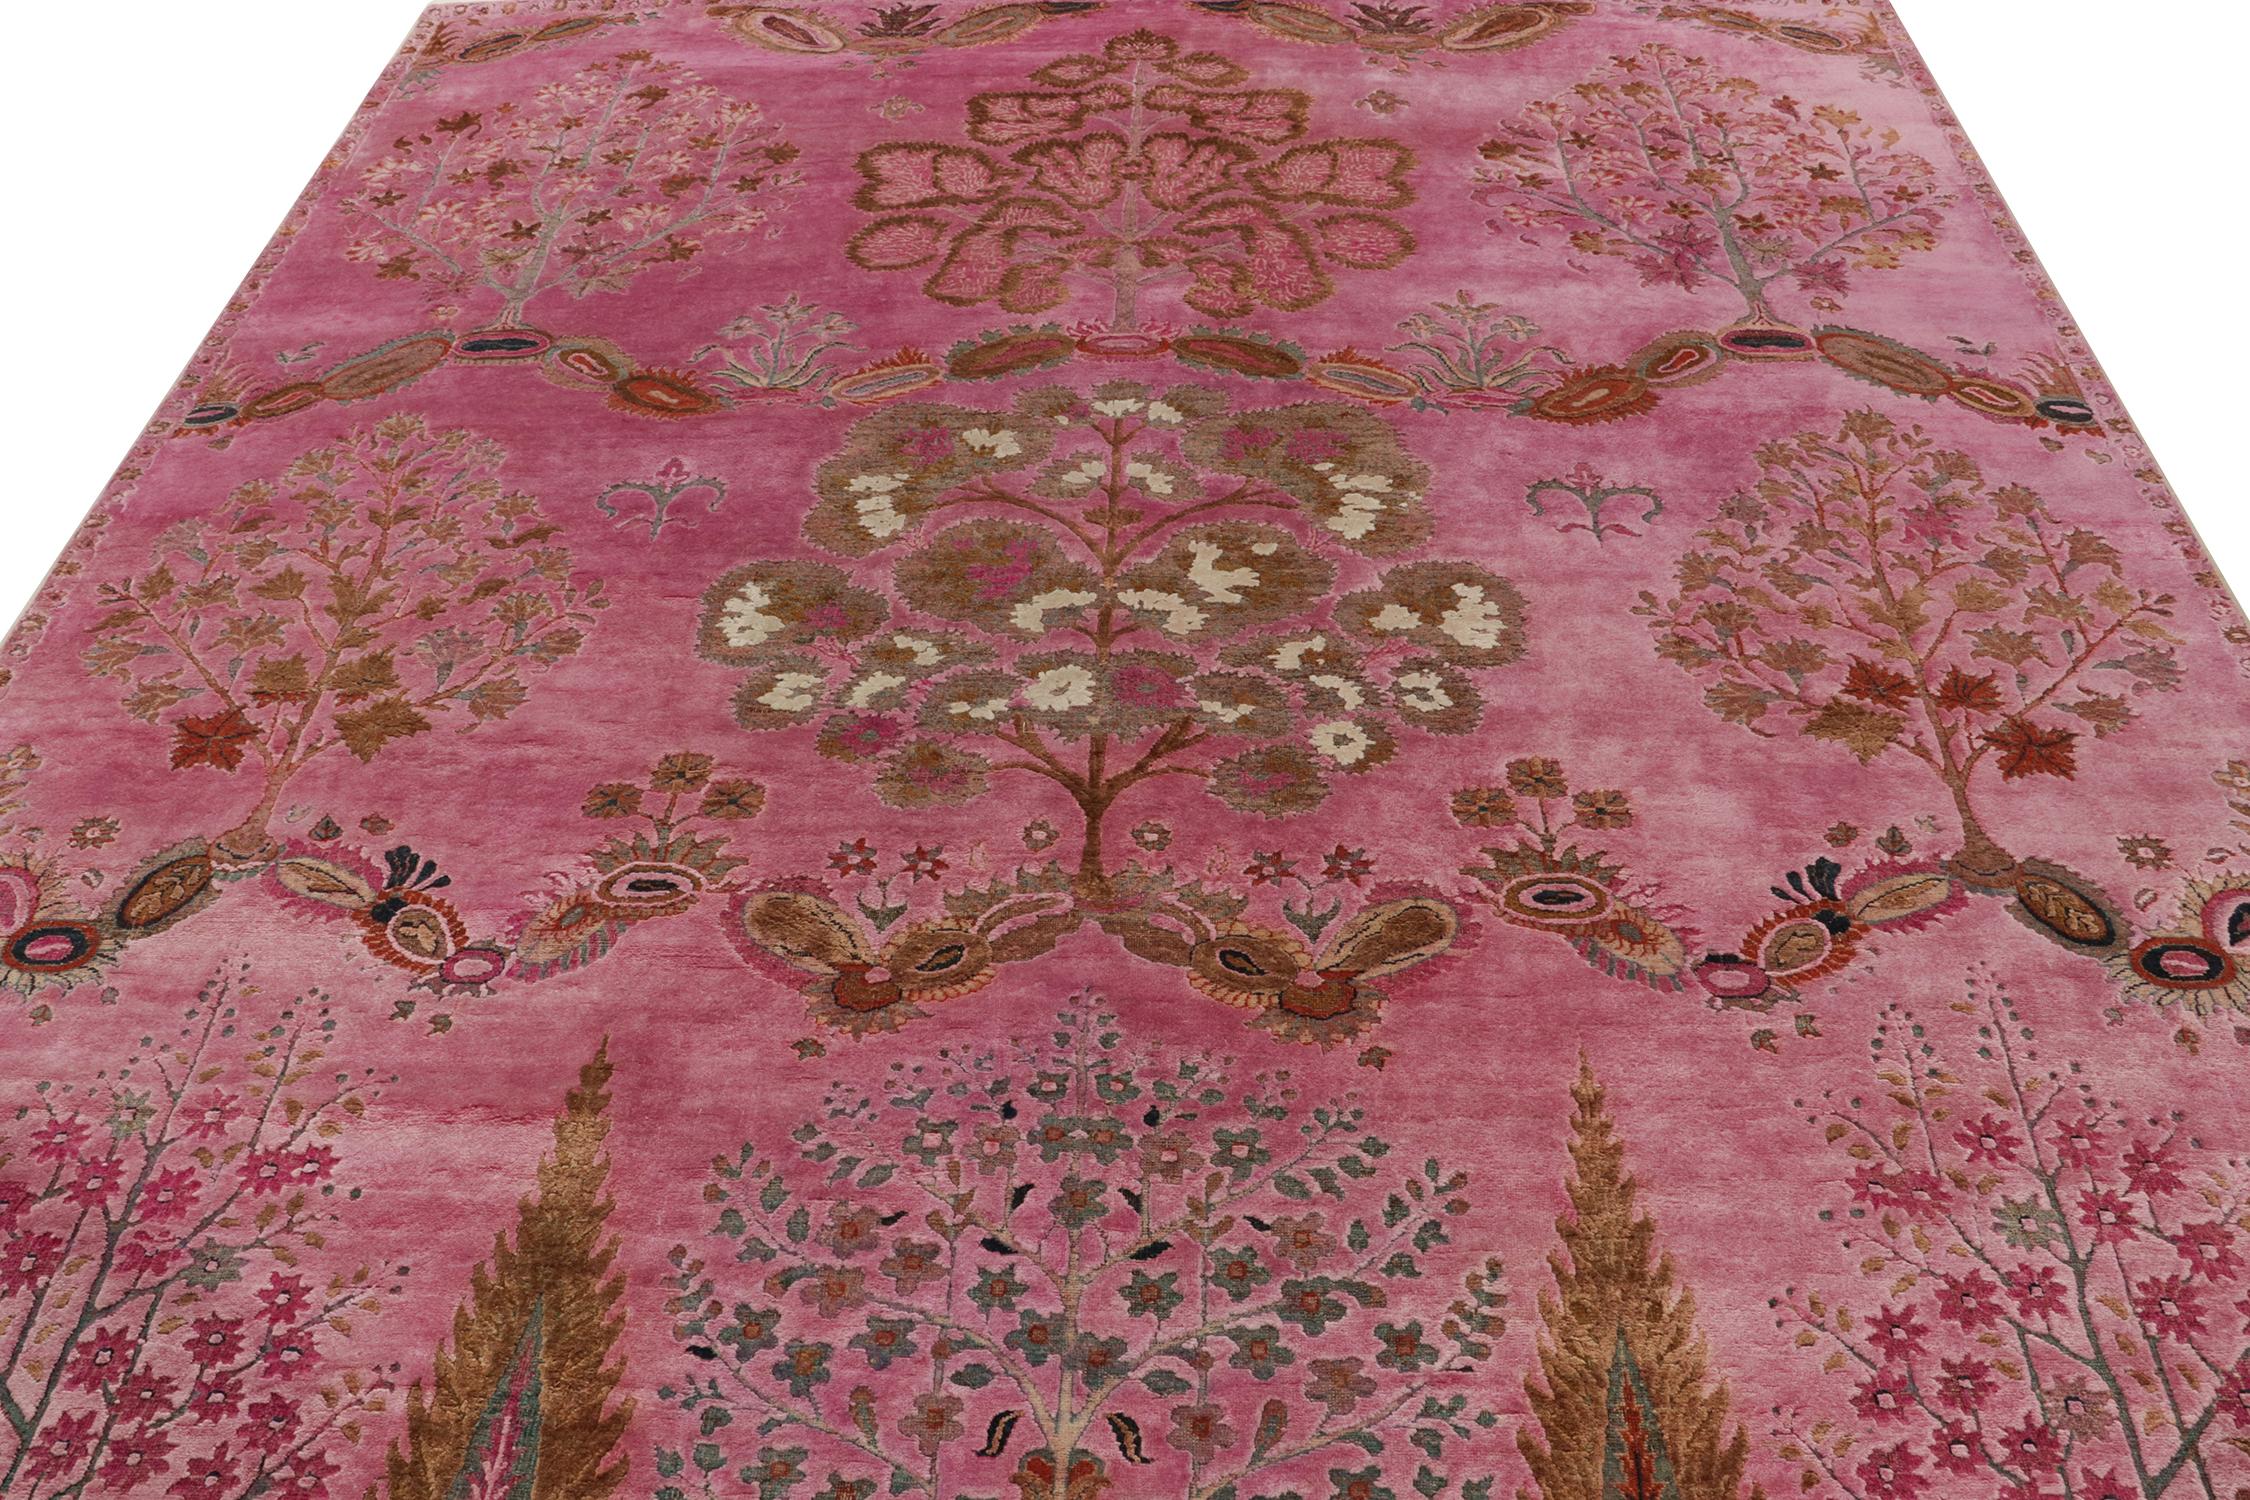 Rug & Kilim’s Classic Style Rug in Pink & Beige-Brown Floral Pattern In New Condition For Sale In Long Island City, NY